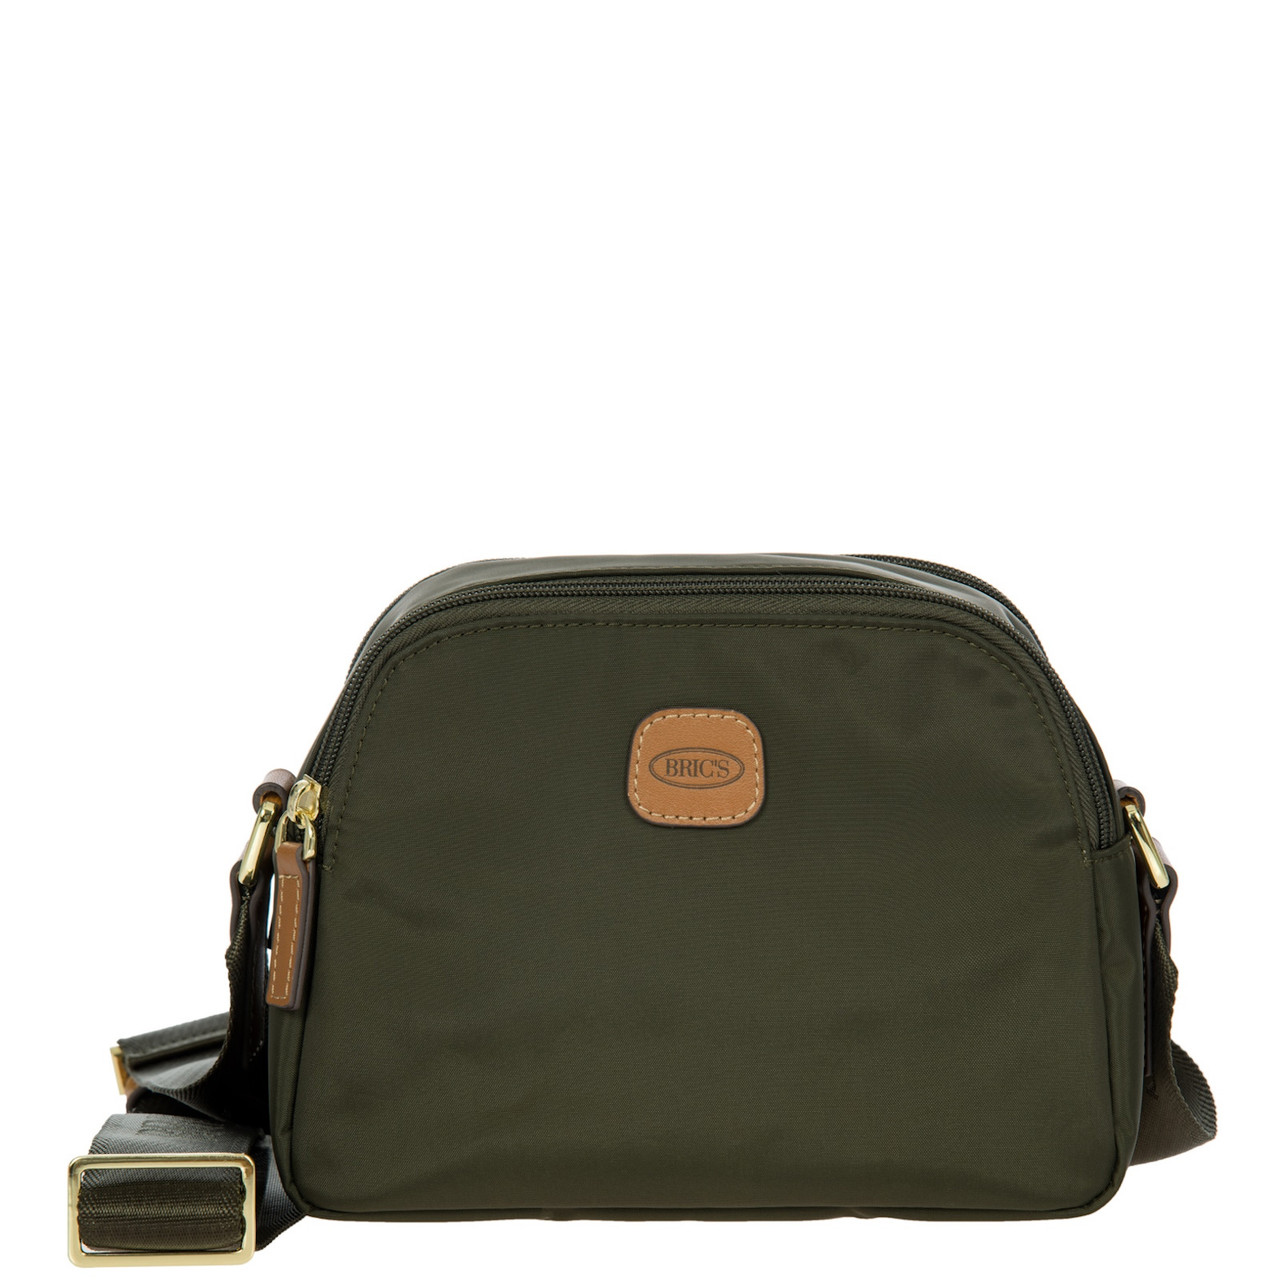 Bric’s X-Bag Small Recycled Shoulder Bag